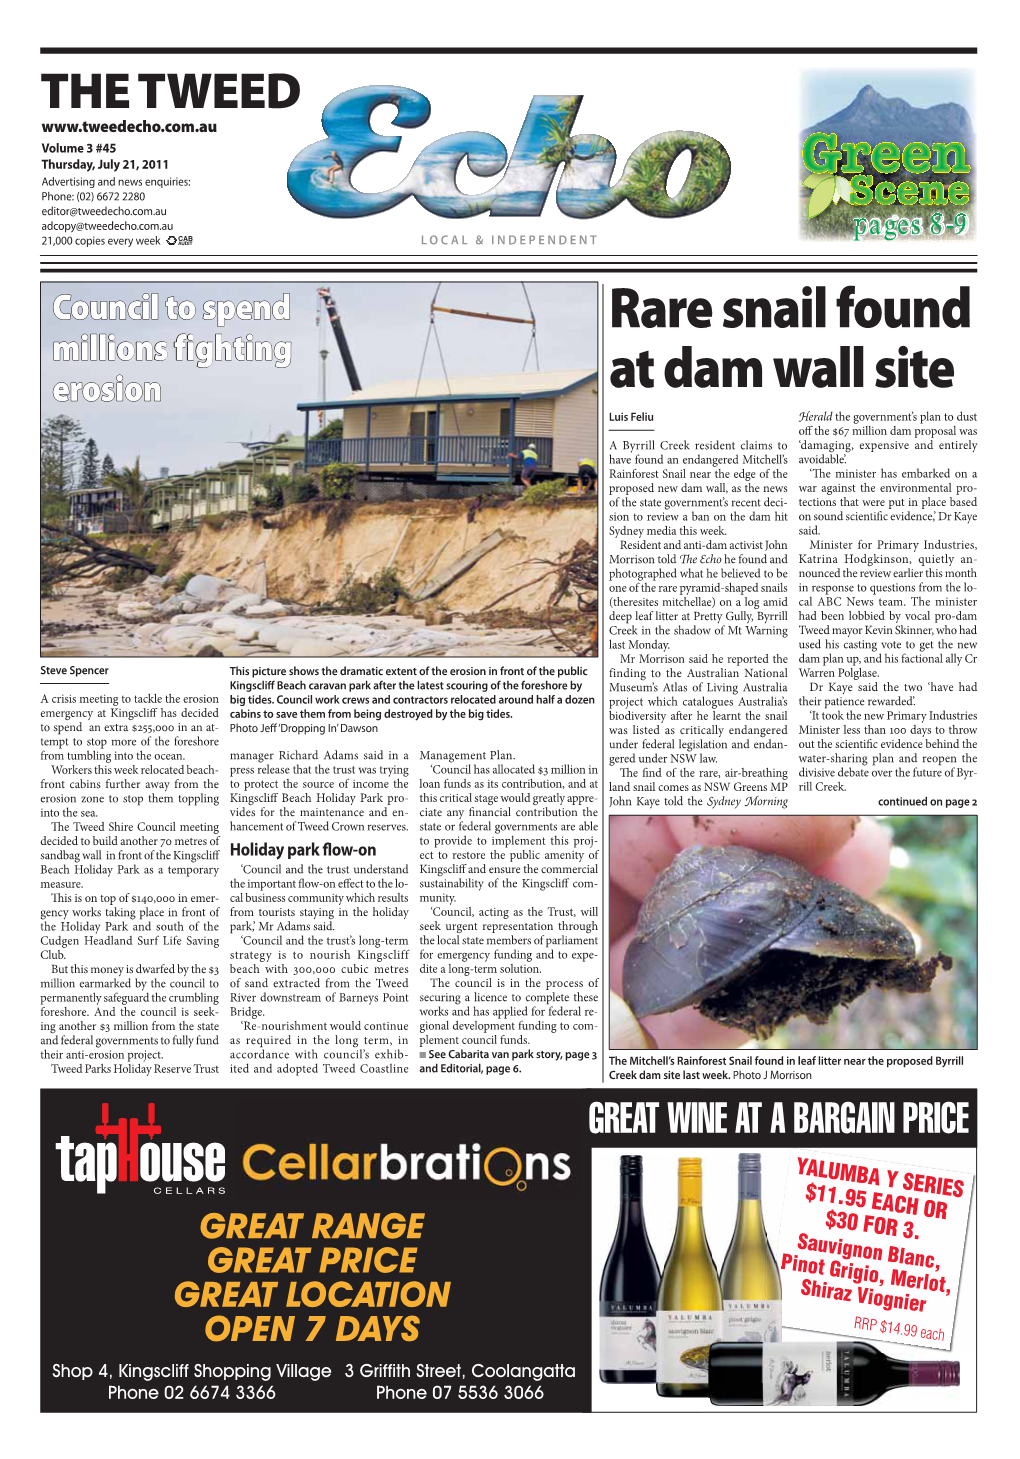 Rare Snail Found at Dam Wall Site